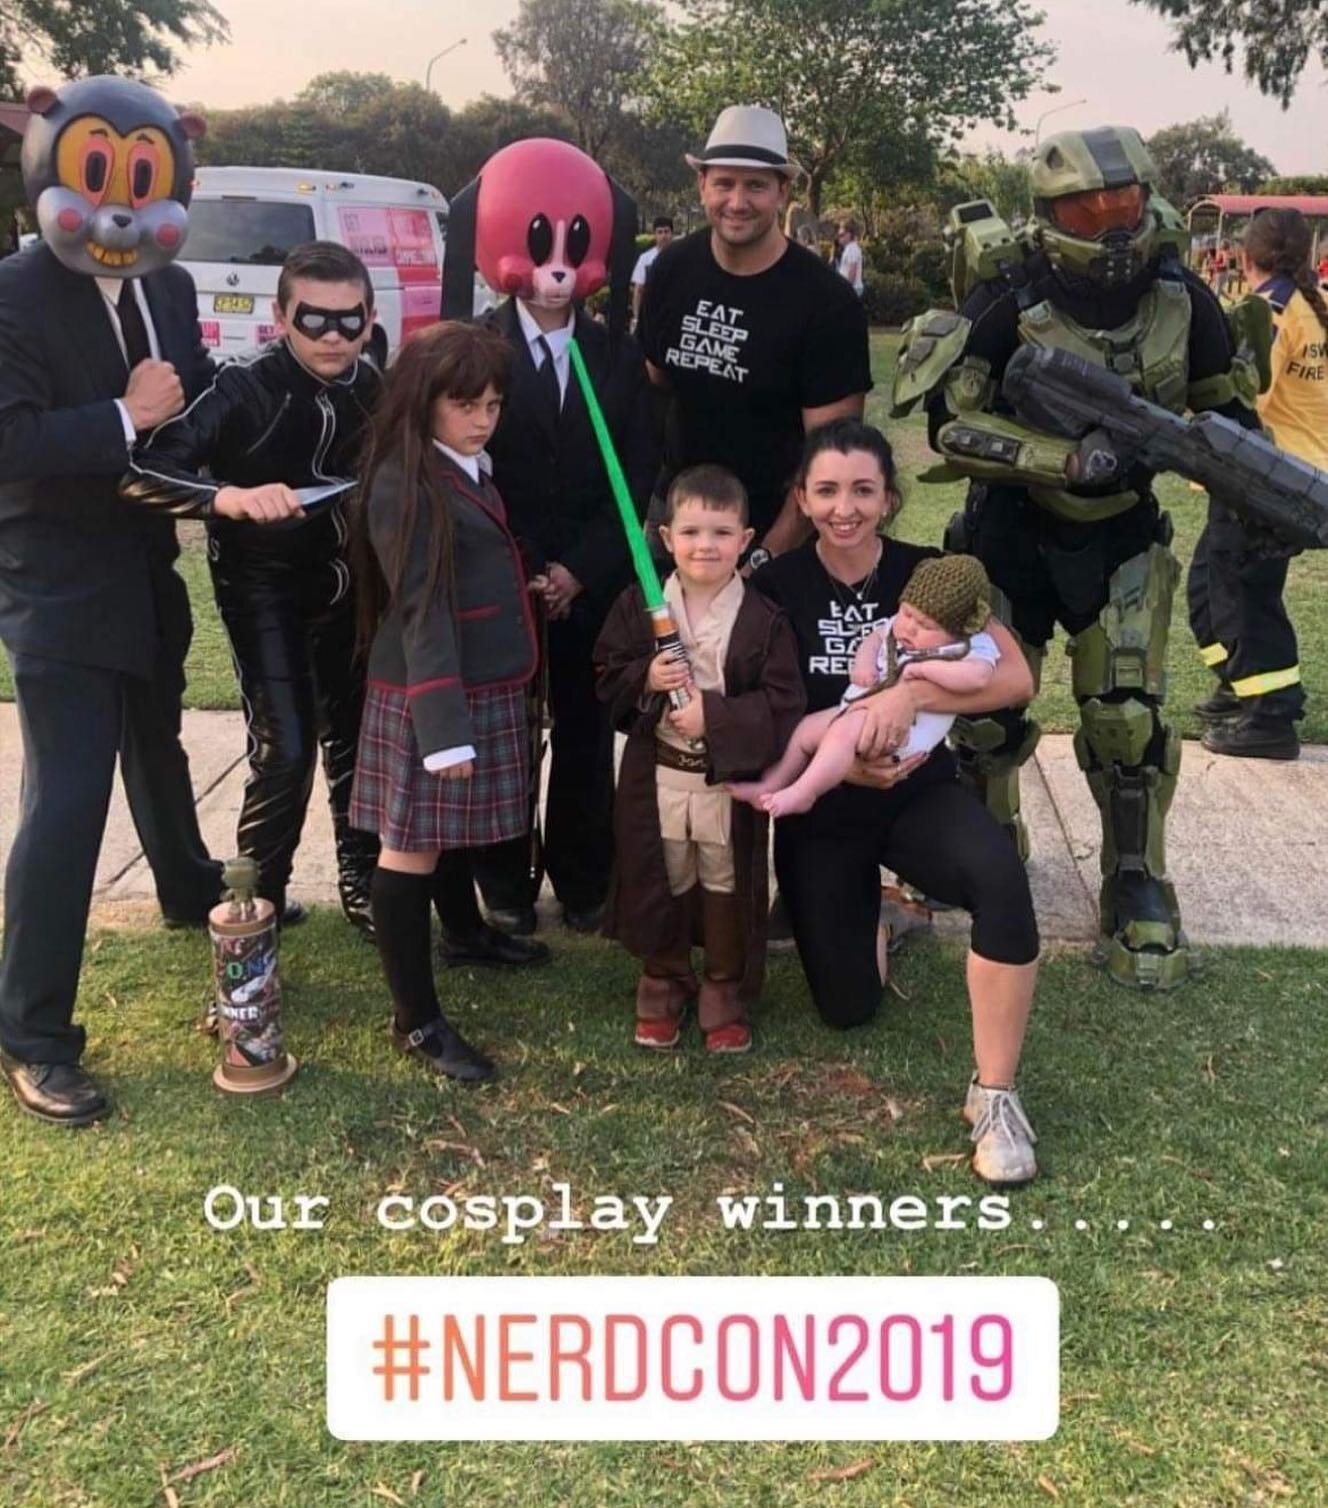 NERD CON 2019 🤓what an awesome experience to host our own show back in 2019. It&rsquo;s been a few years and shows are back in our sites 👀 
.
.
.
.
#popculture #popcultureshow #gaming #gamingshow #popcultureconvention #gamingconvention #campbelltow